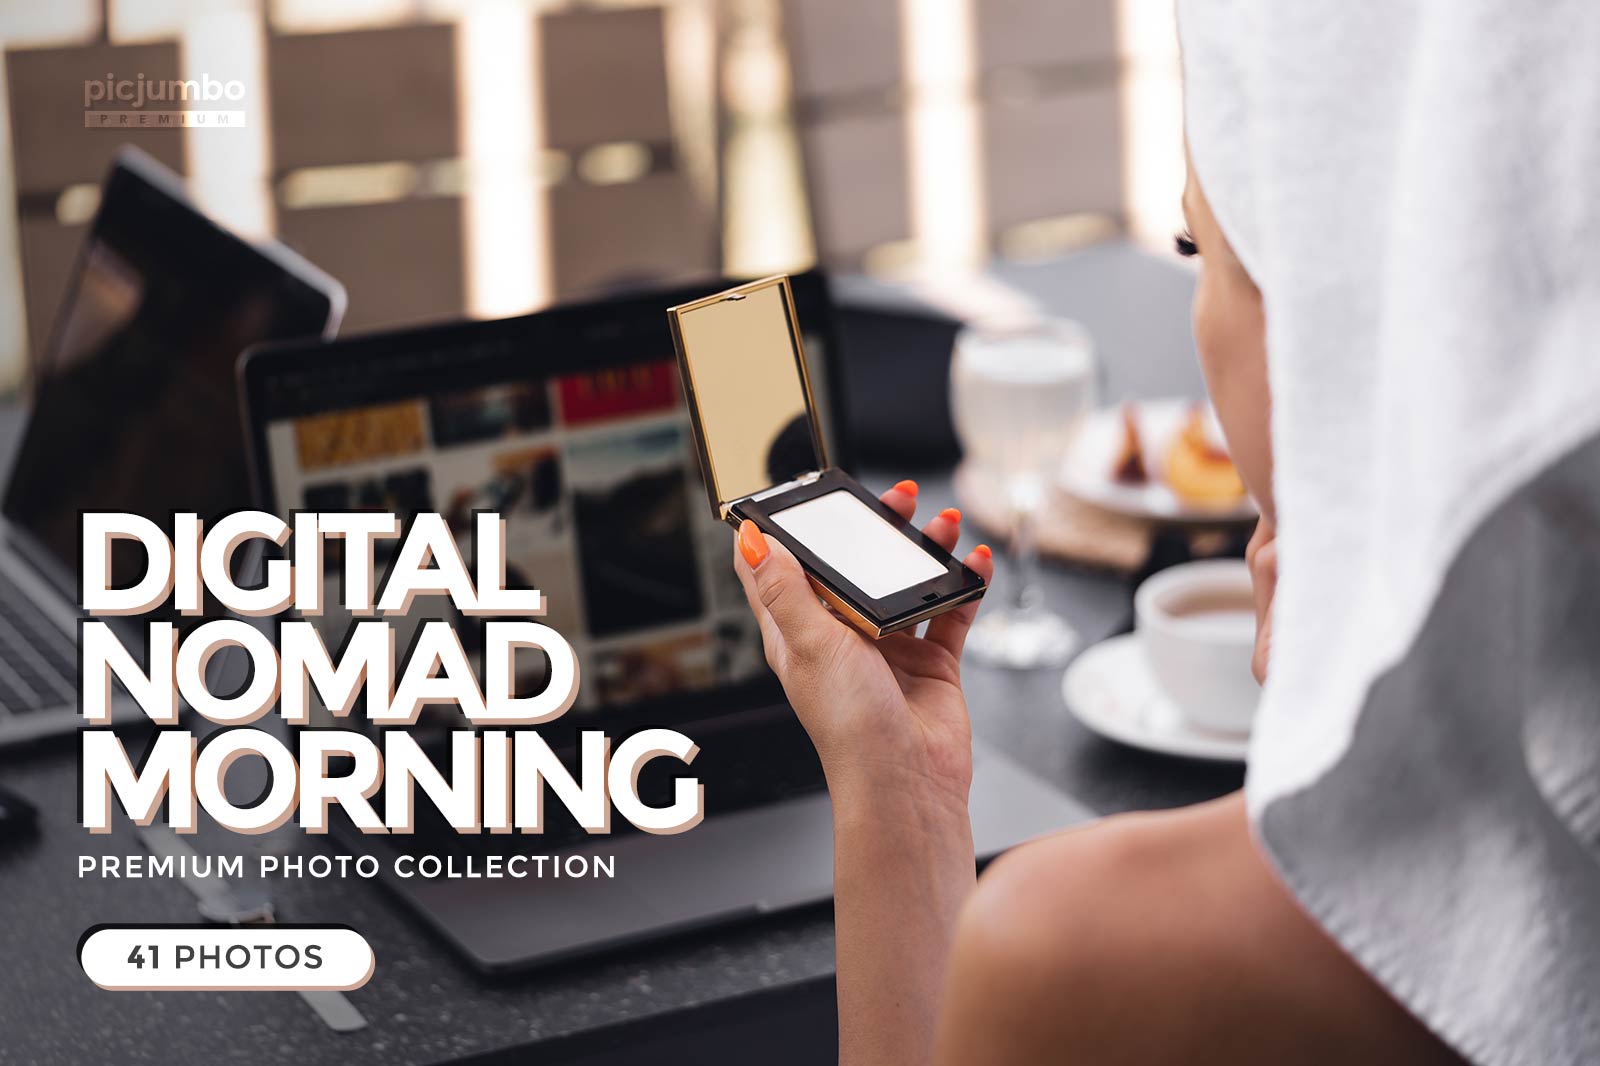 Digital Nomad Morning Stock Photo Collection